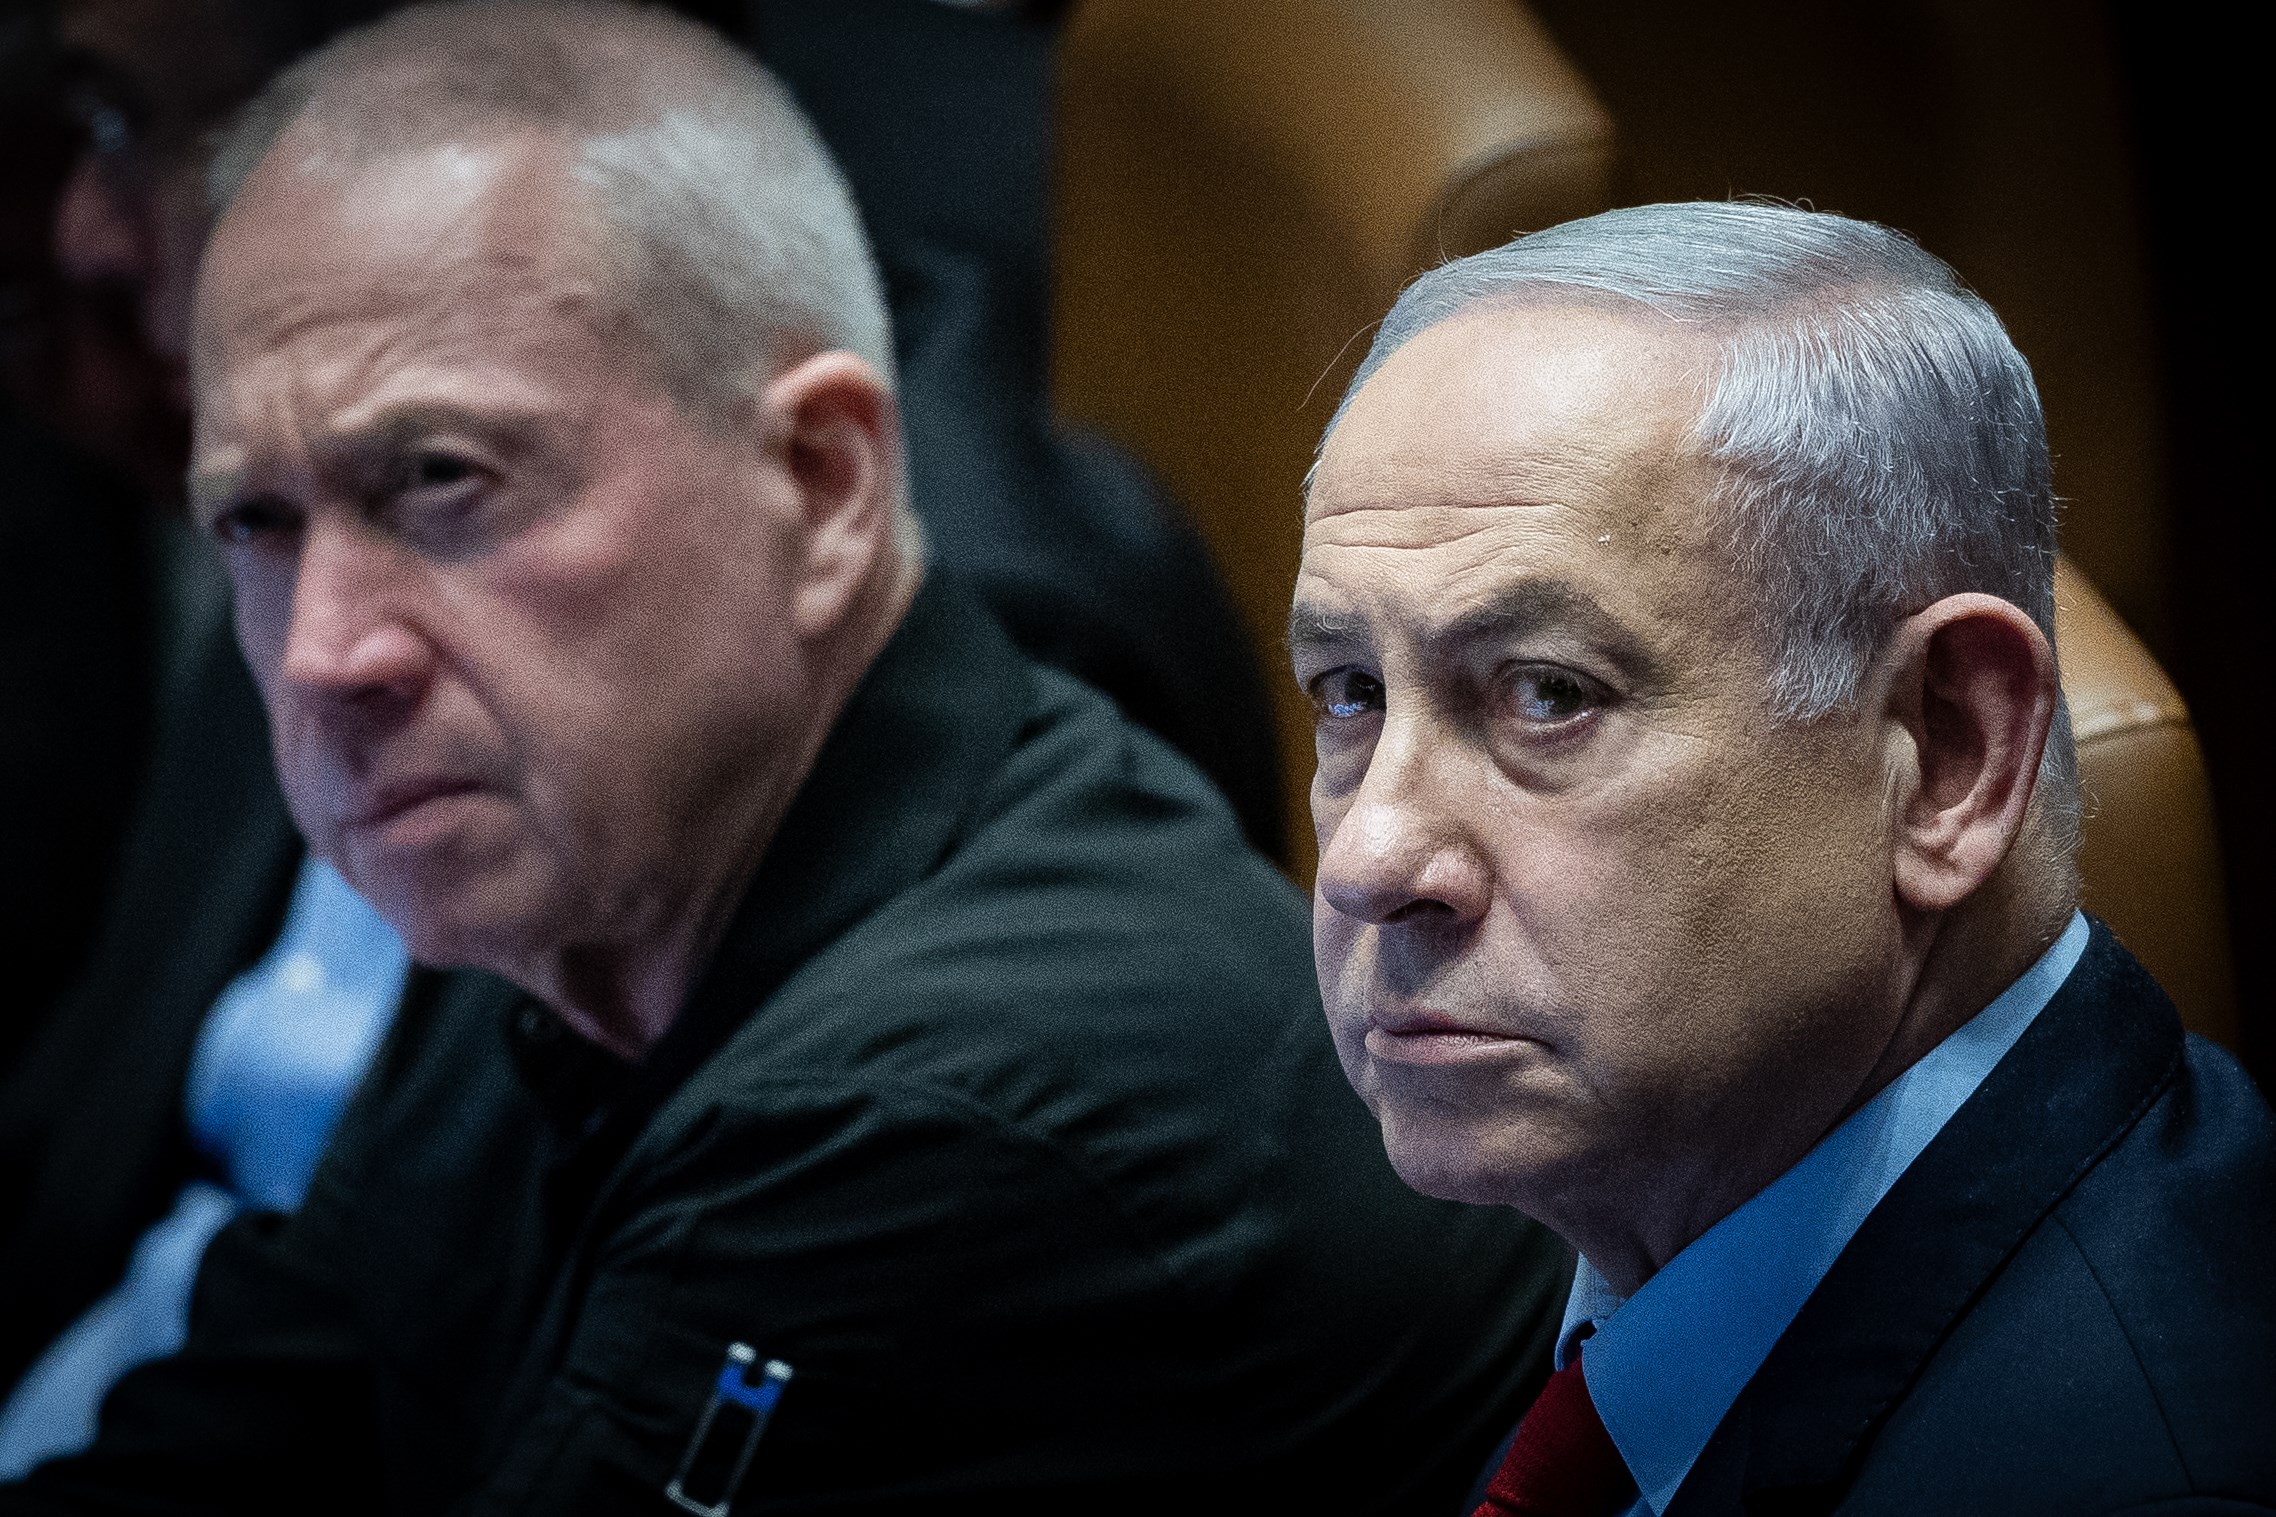 Majority of Israelis give low ratings to Prime Minister Netanyahu; high ratings to IDF Chief of Staff